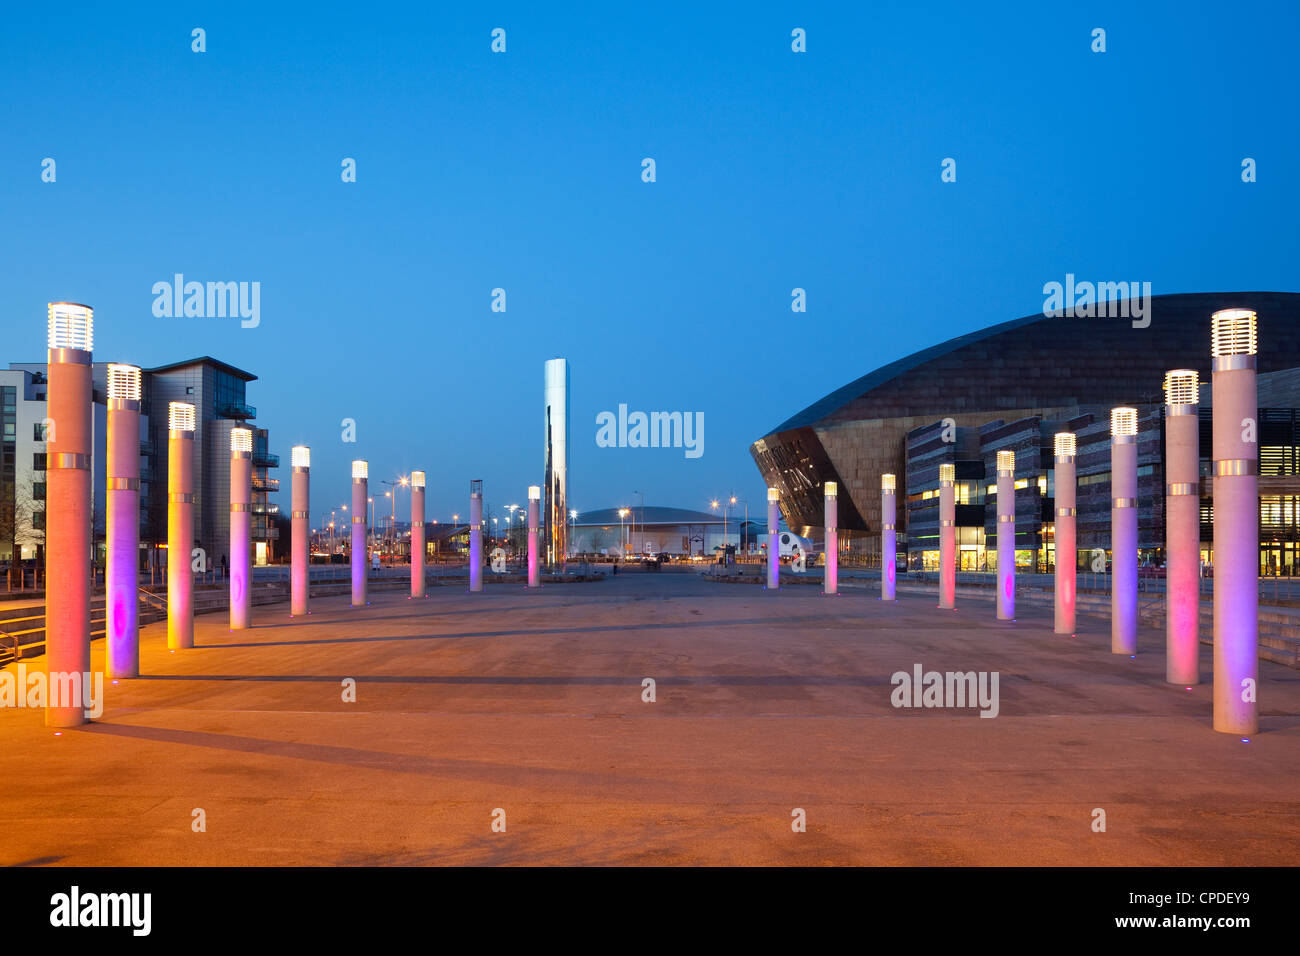 Millennium Centre, Cardiff Bay, South Wales, Wales, United Kingdom, Europe Stock Photo